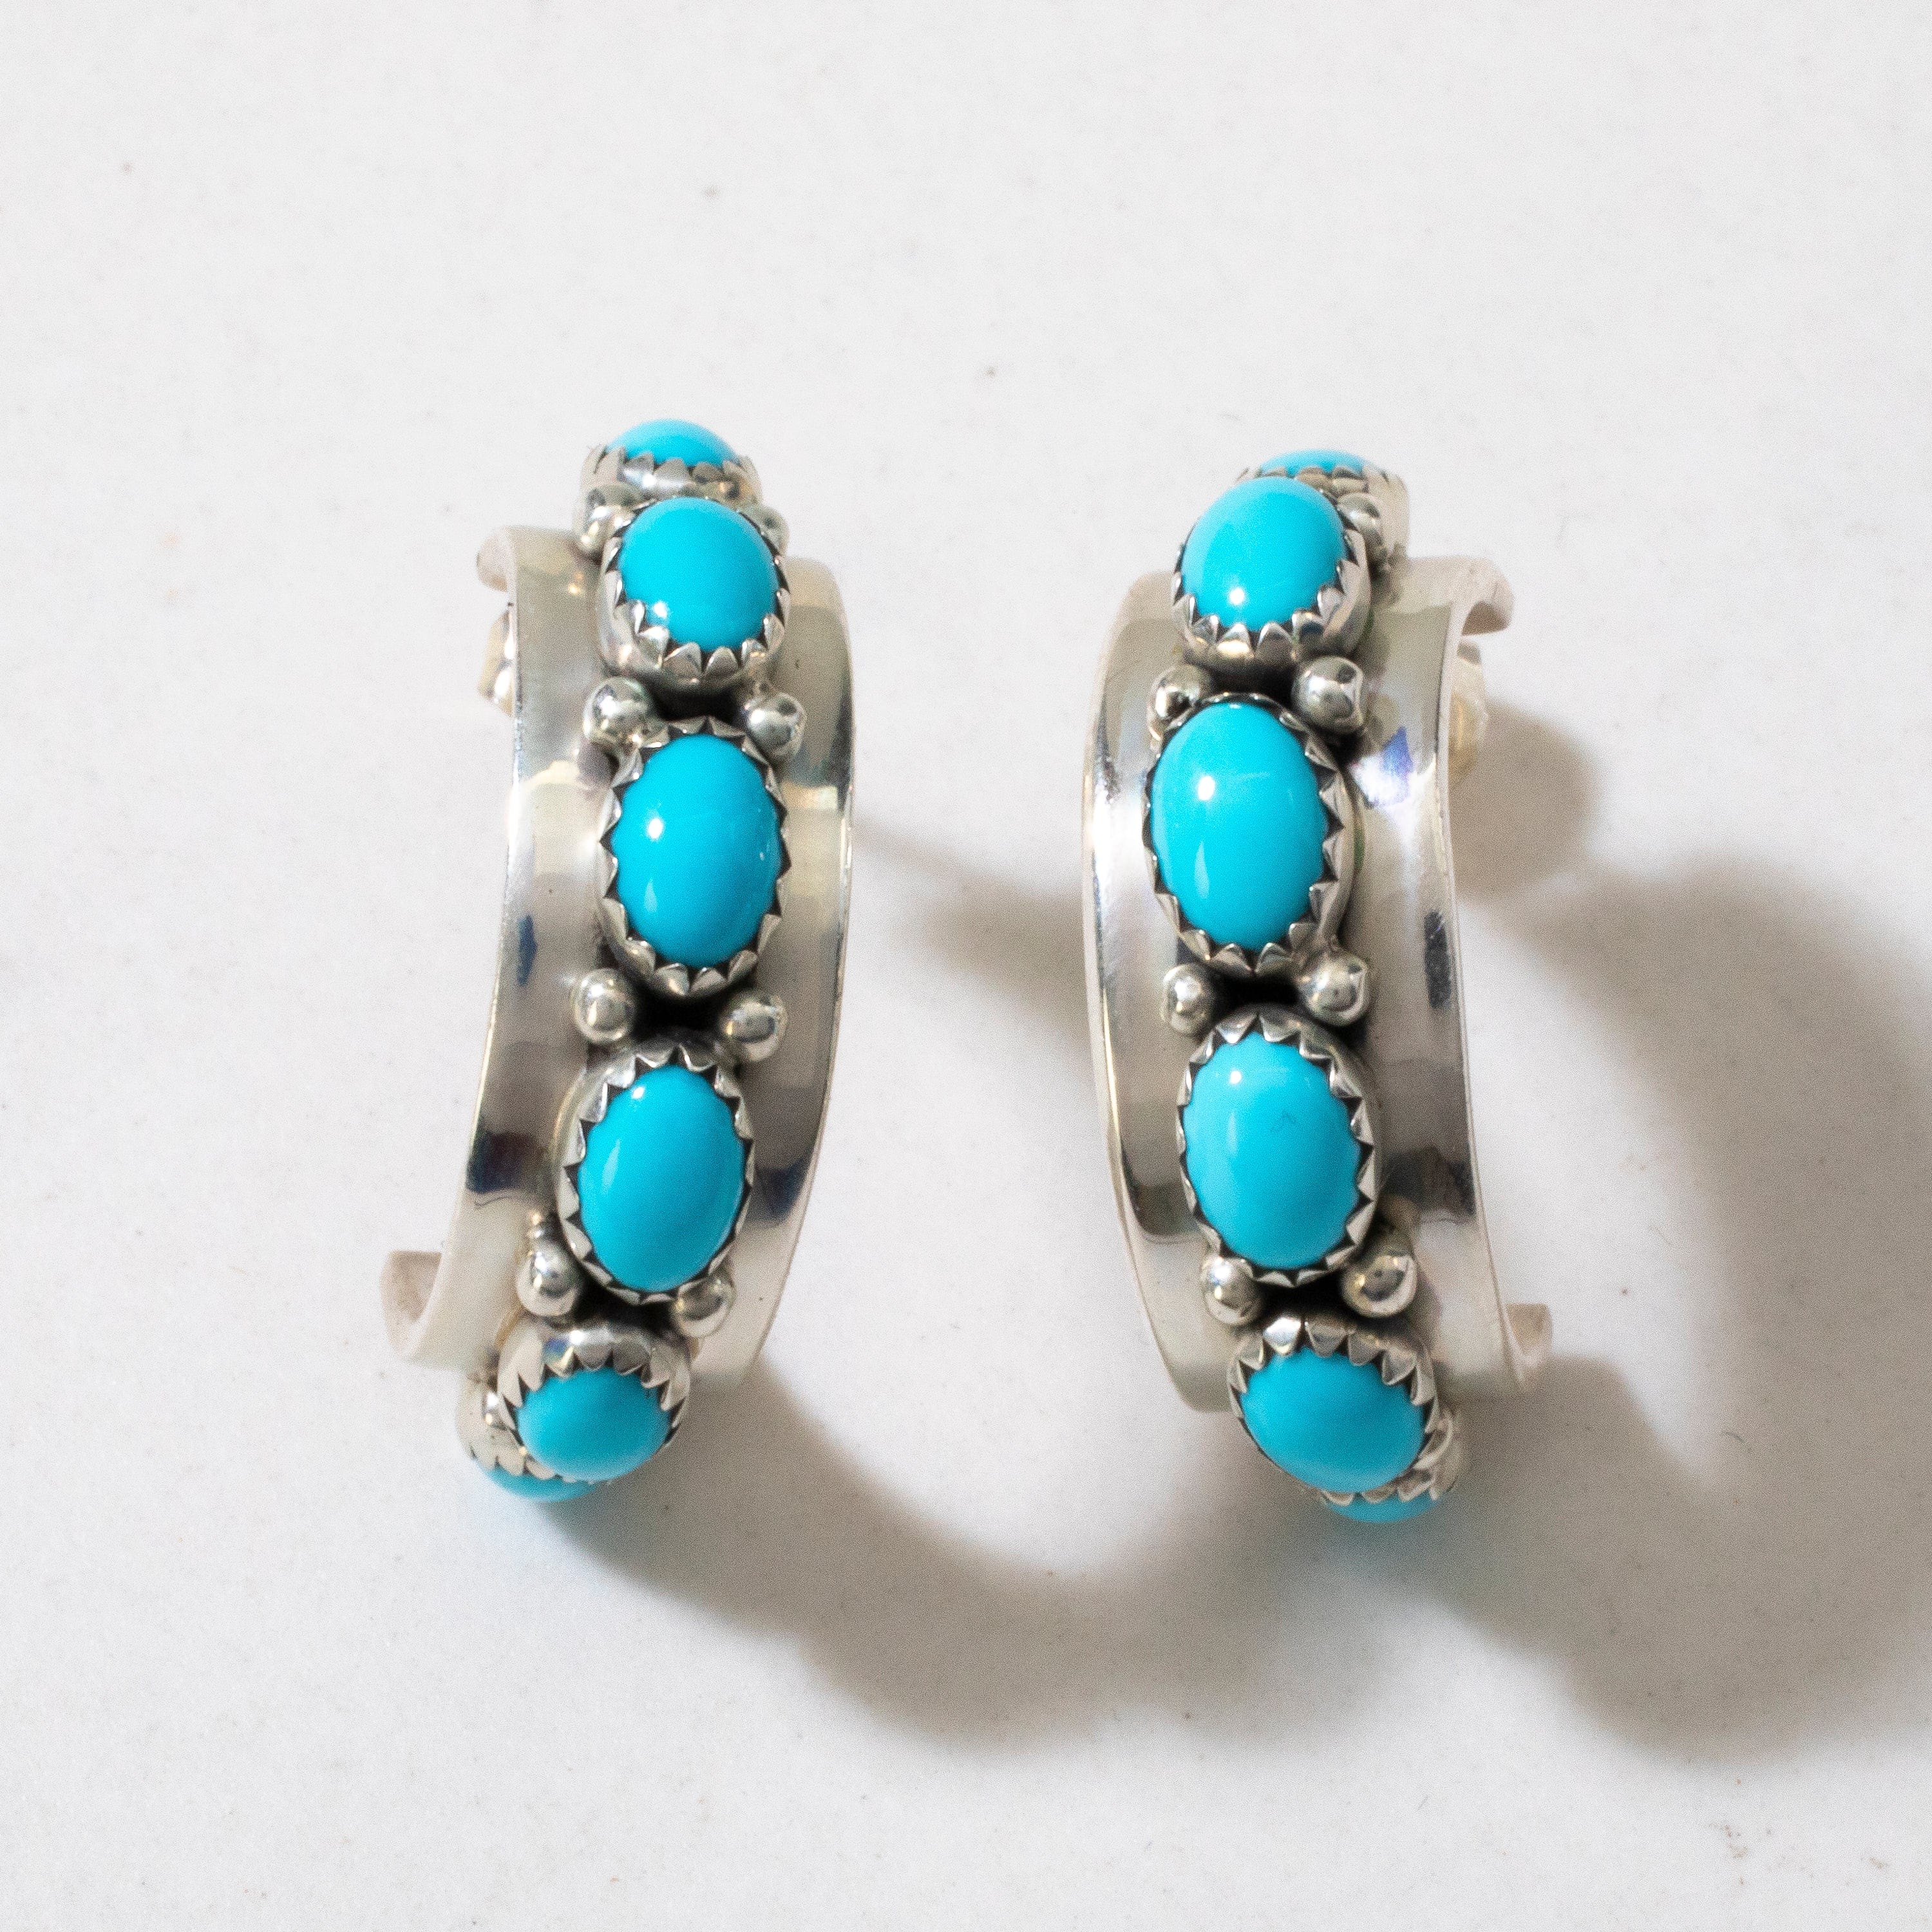 Kalifano Native American Jewelry Sleeping Beauty Turquoise Semi Hoop Navajo USA Native American Made 925 Sterling Silver Earrings with Stud Backing NAE700.006